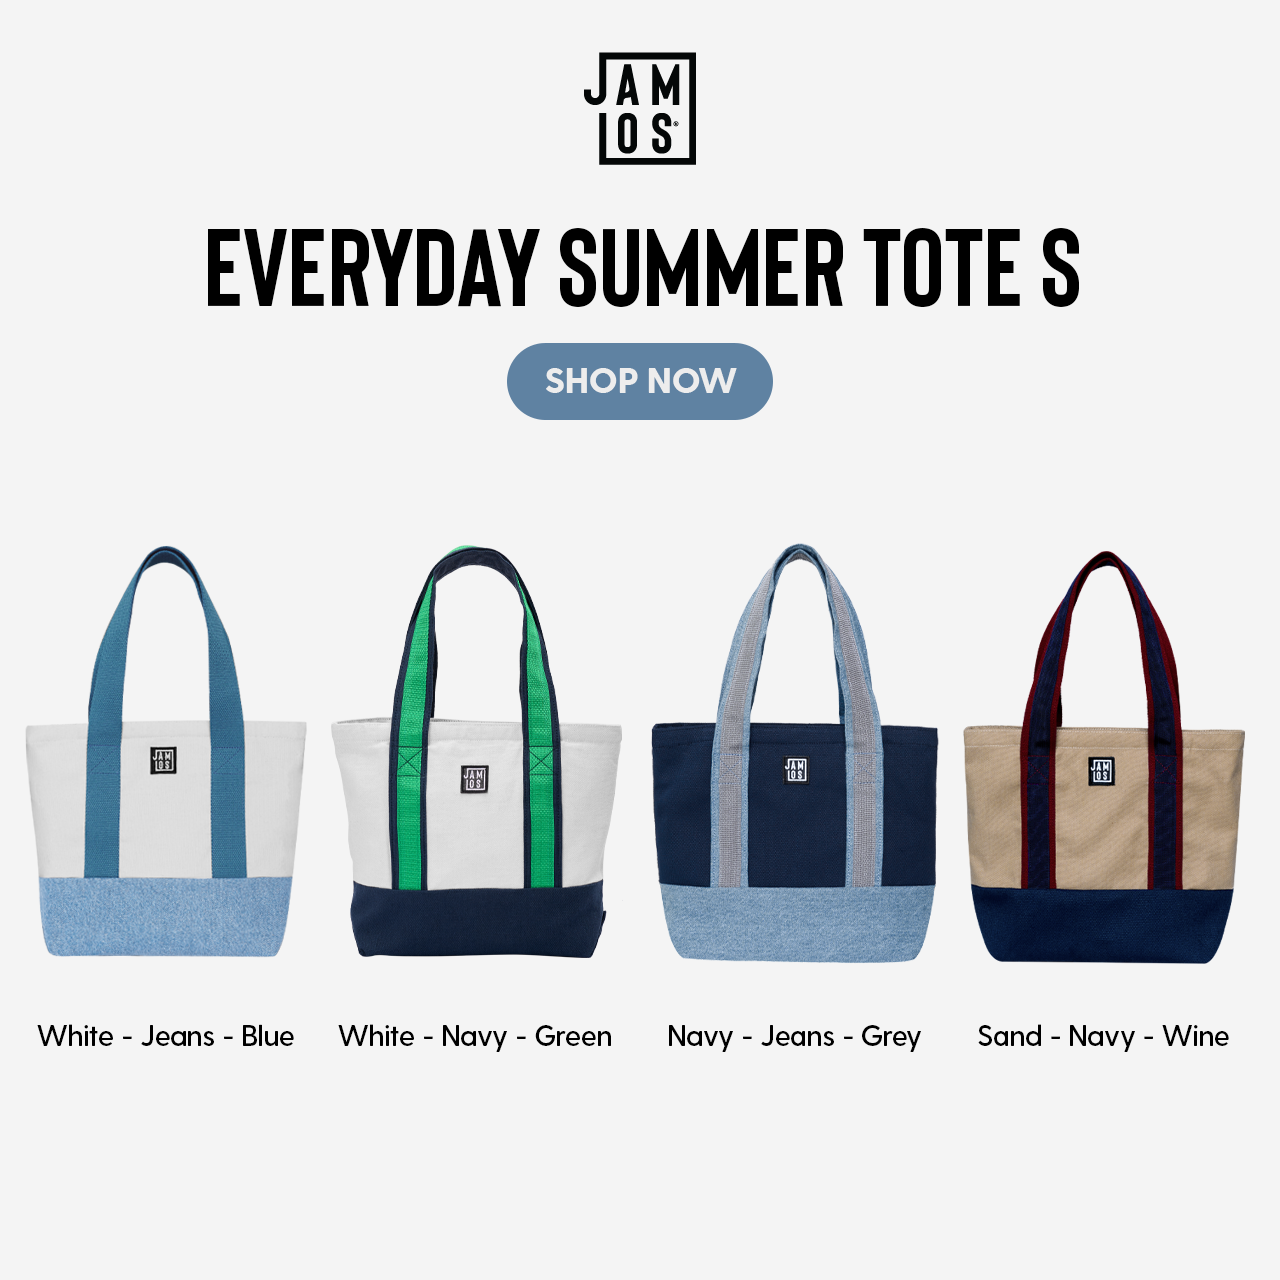 Everyday Summer Tote S